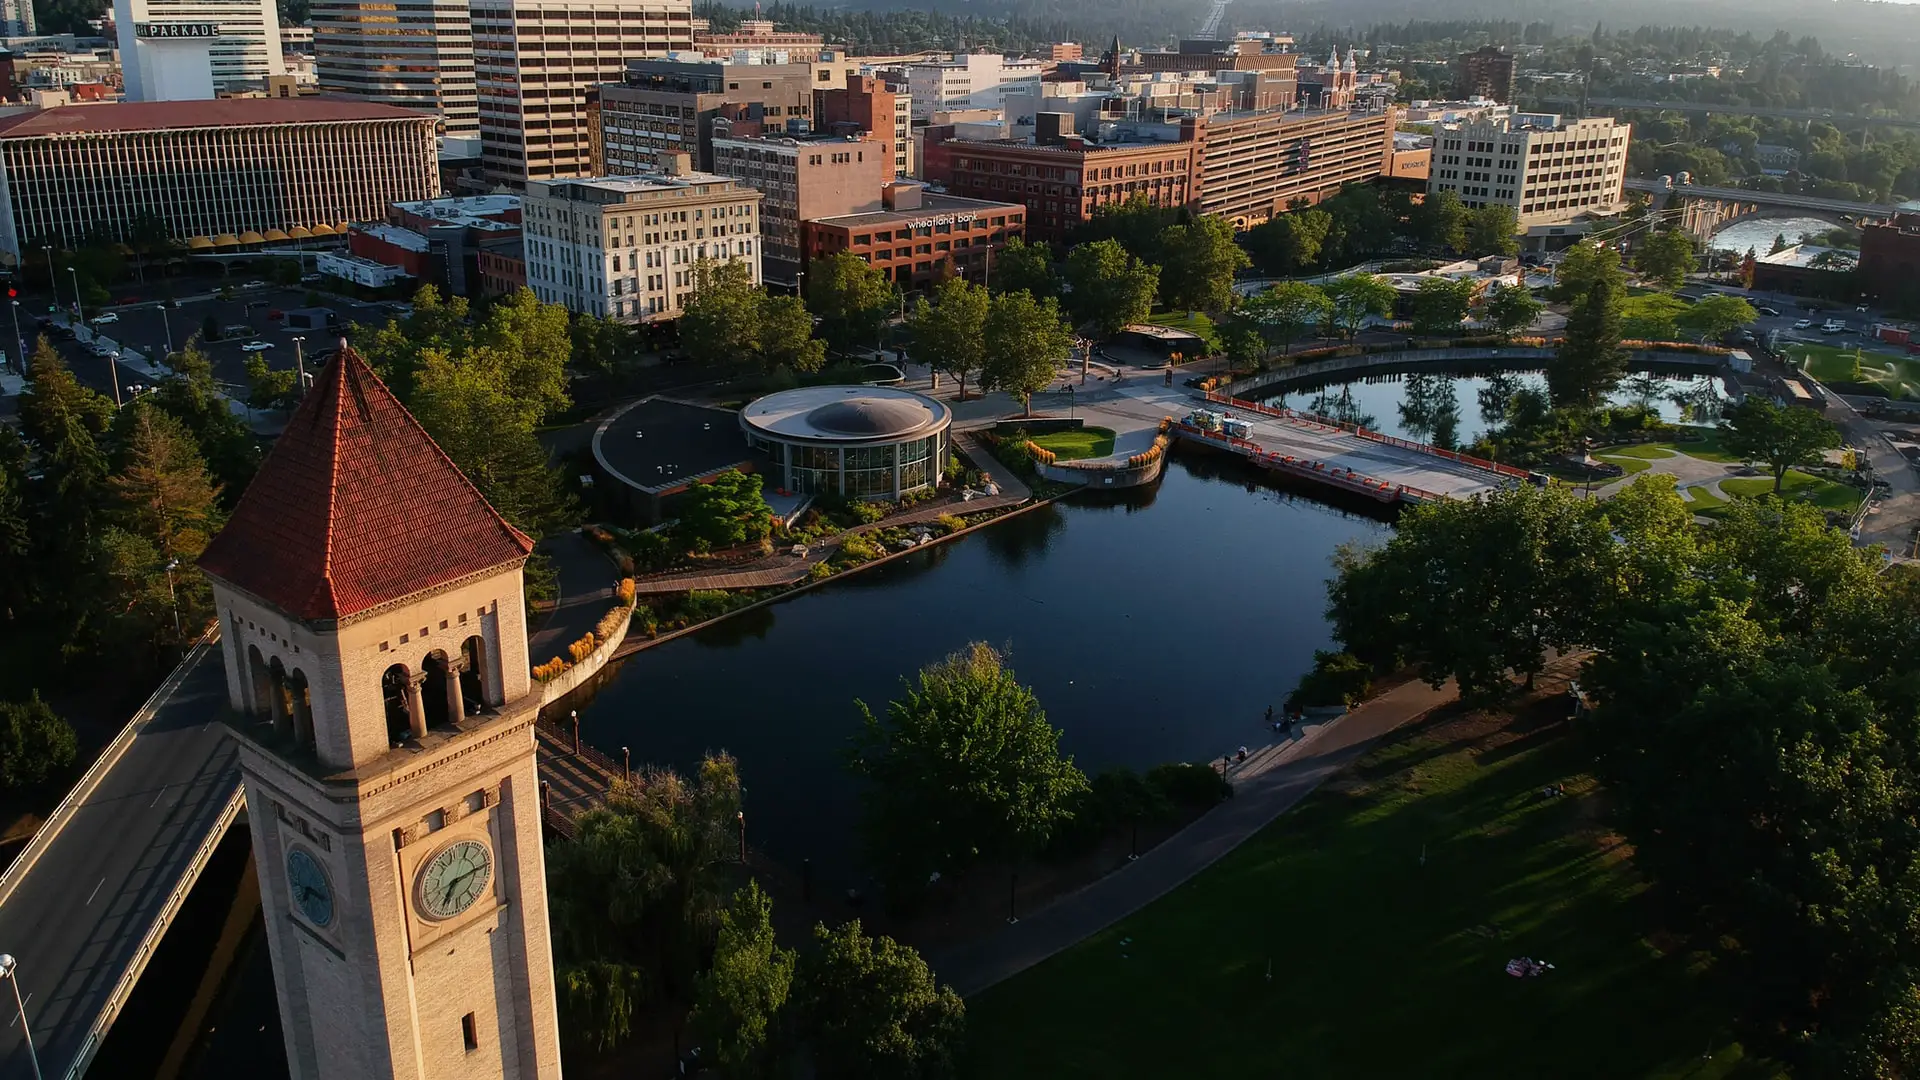 Albuquerque vs. Spokane - Where is the best place to live?